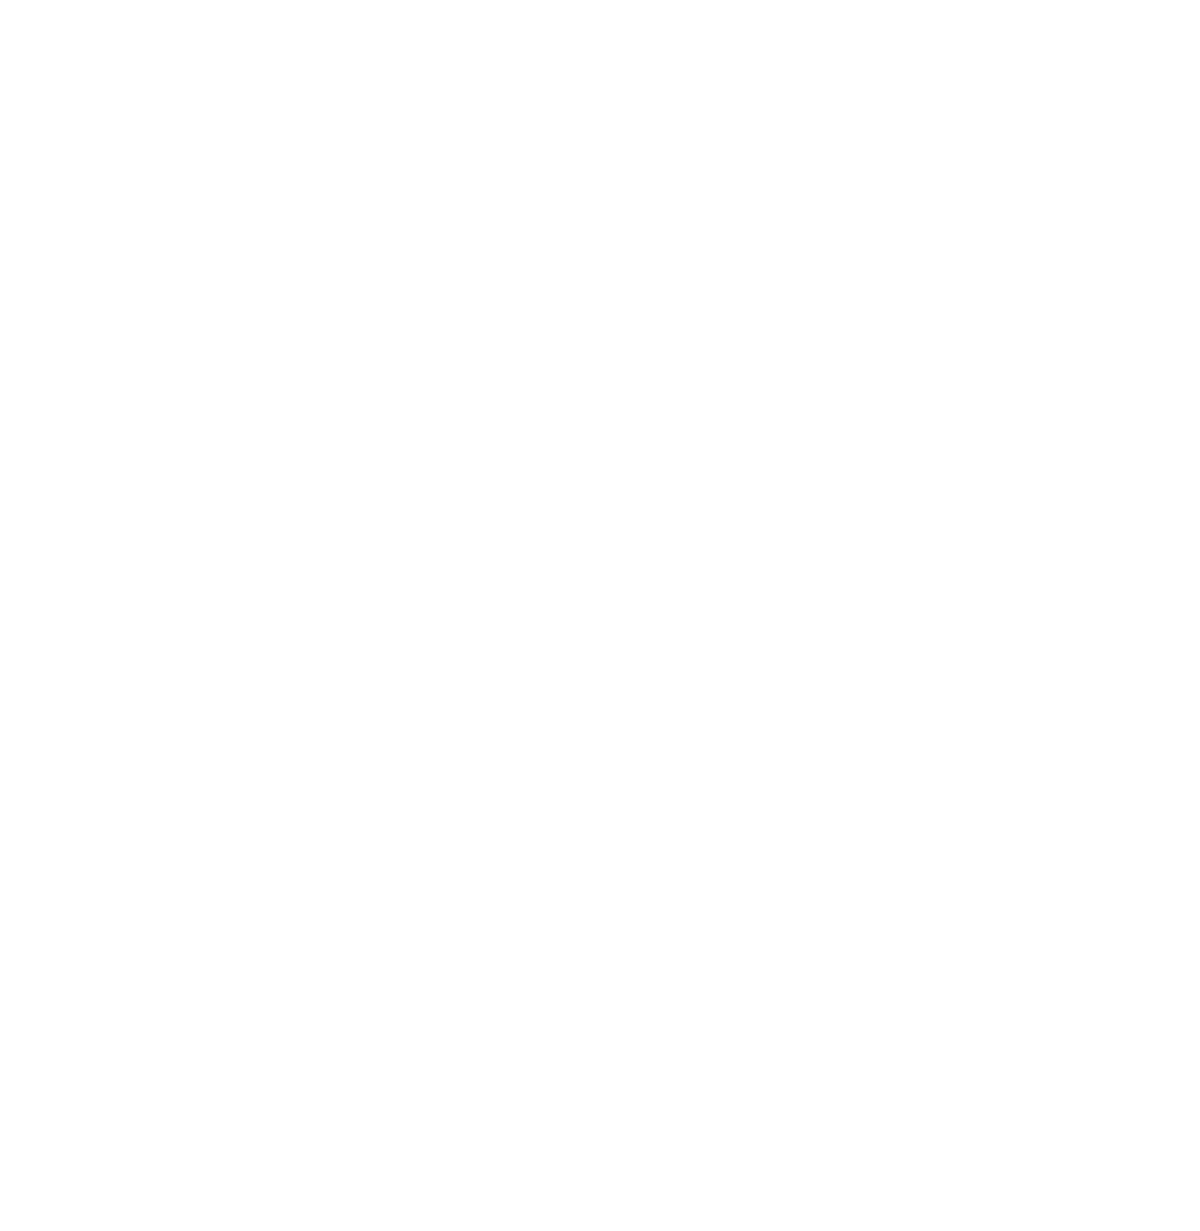 https://www.solvalis.com/wp-content/uploads/1200px-Blank_France_map_no_Departments.svg_.png